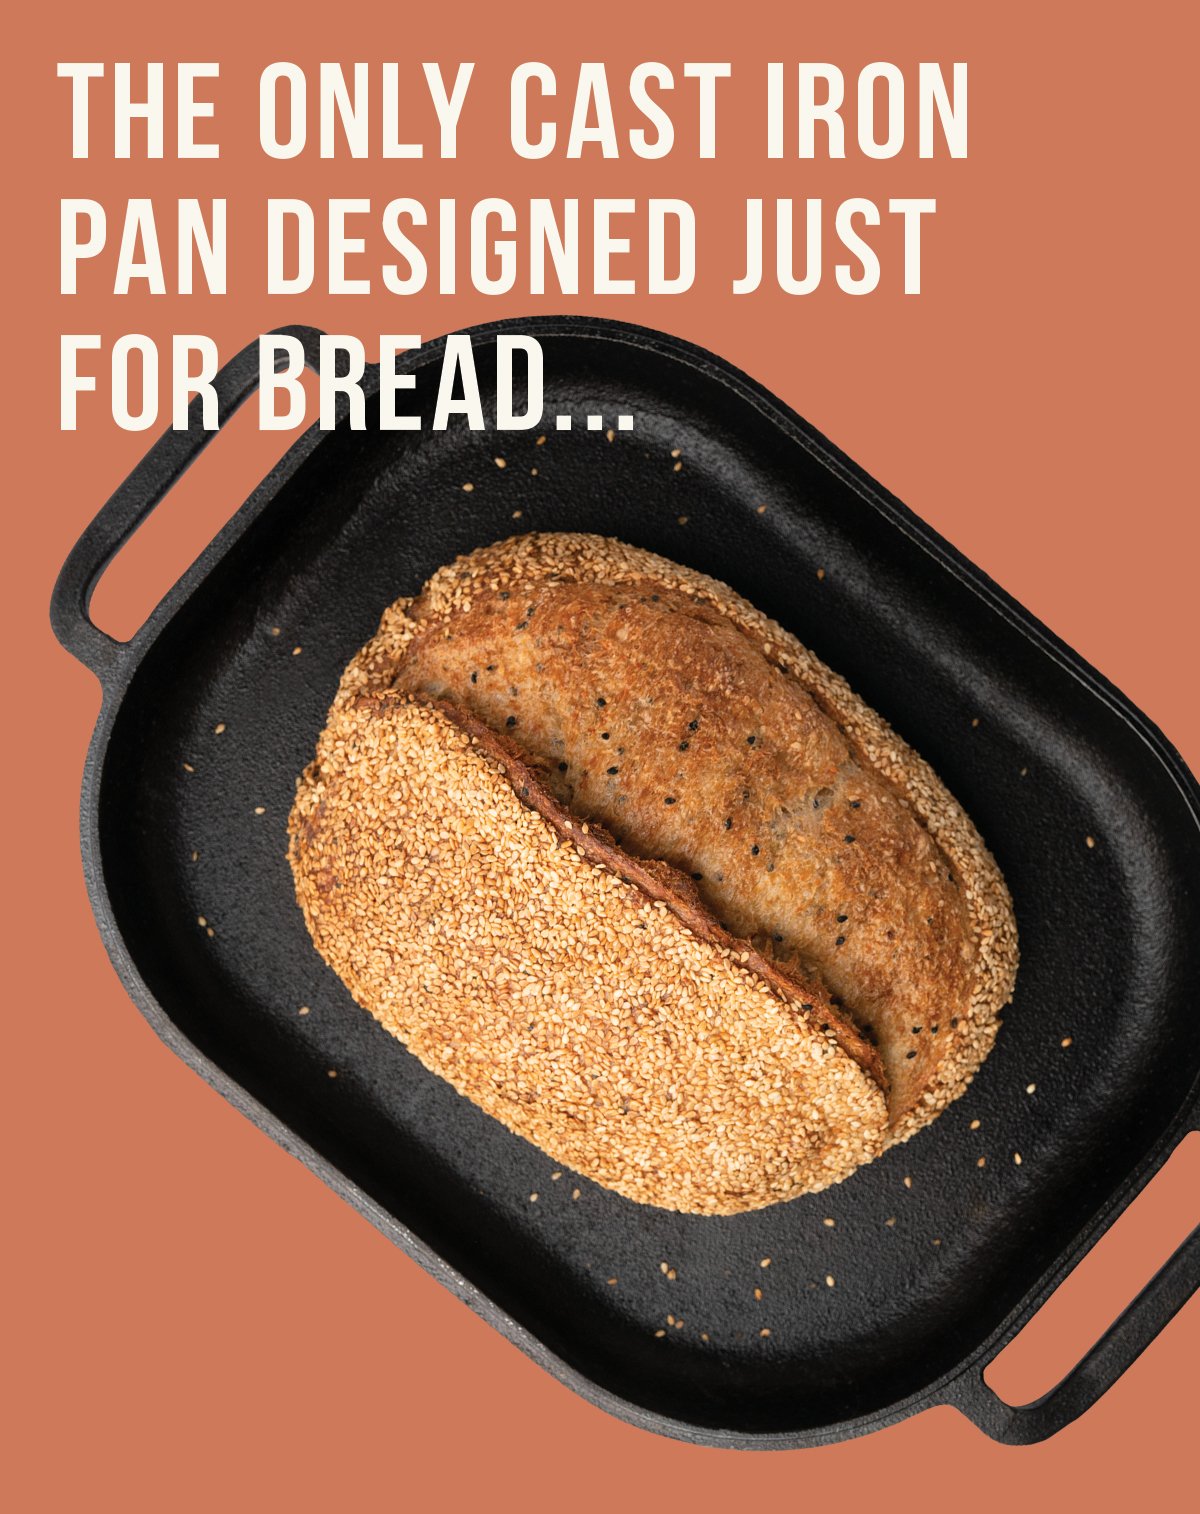 Our Black Friday deal is here! - Challenger Breadware